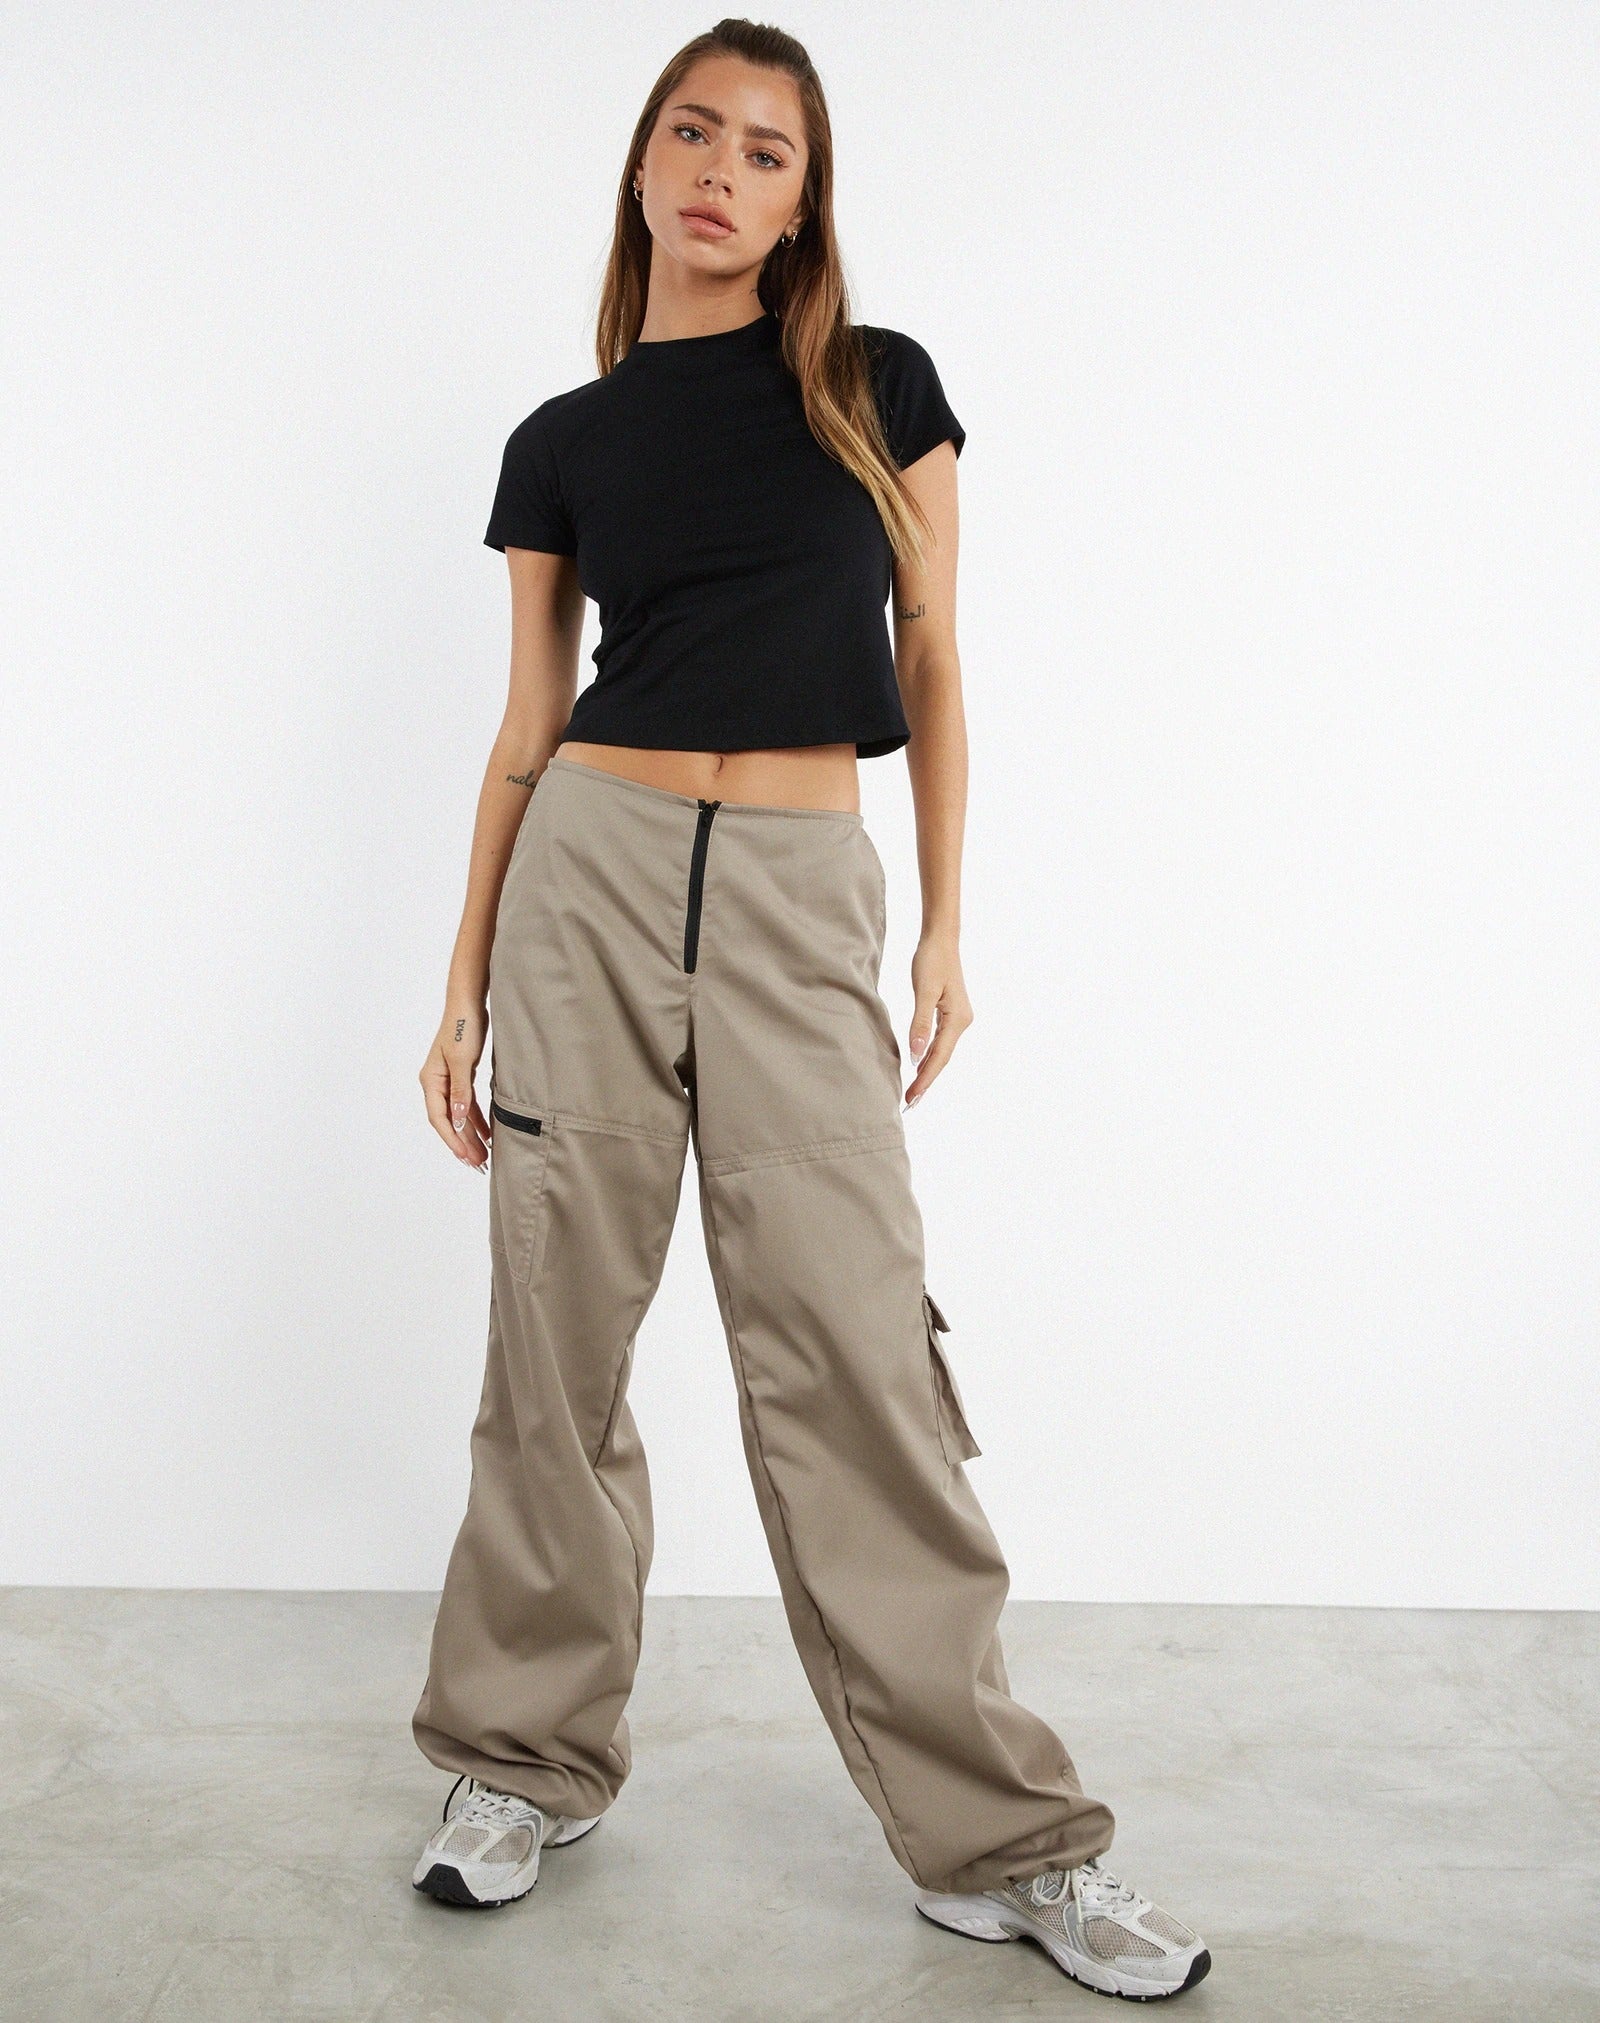 How to style cargo pants 7 great ways to wear the look  Woman  Home